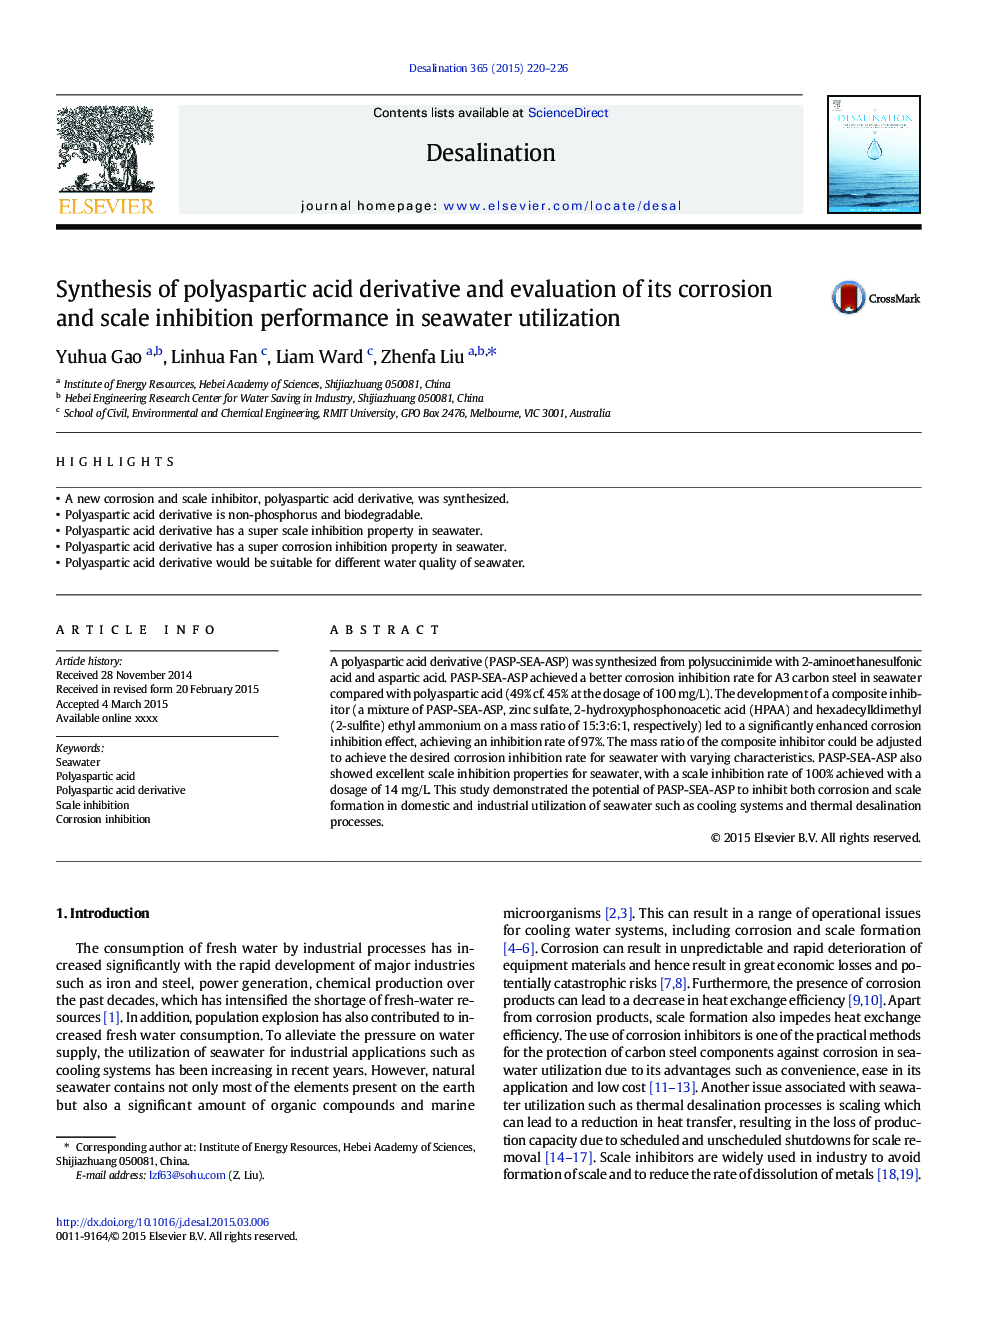 Synthesis of polyaspartic acid derivative and evaluation of its corrosion and scale inhibition performance in seawater utilization